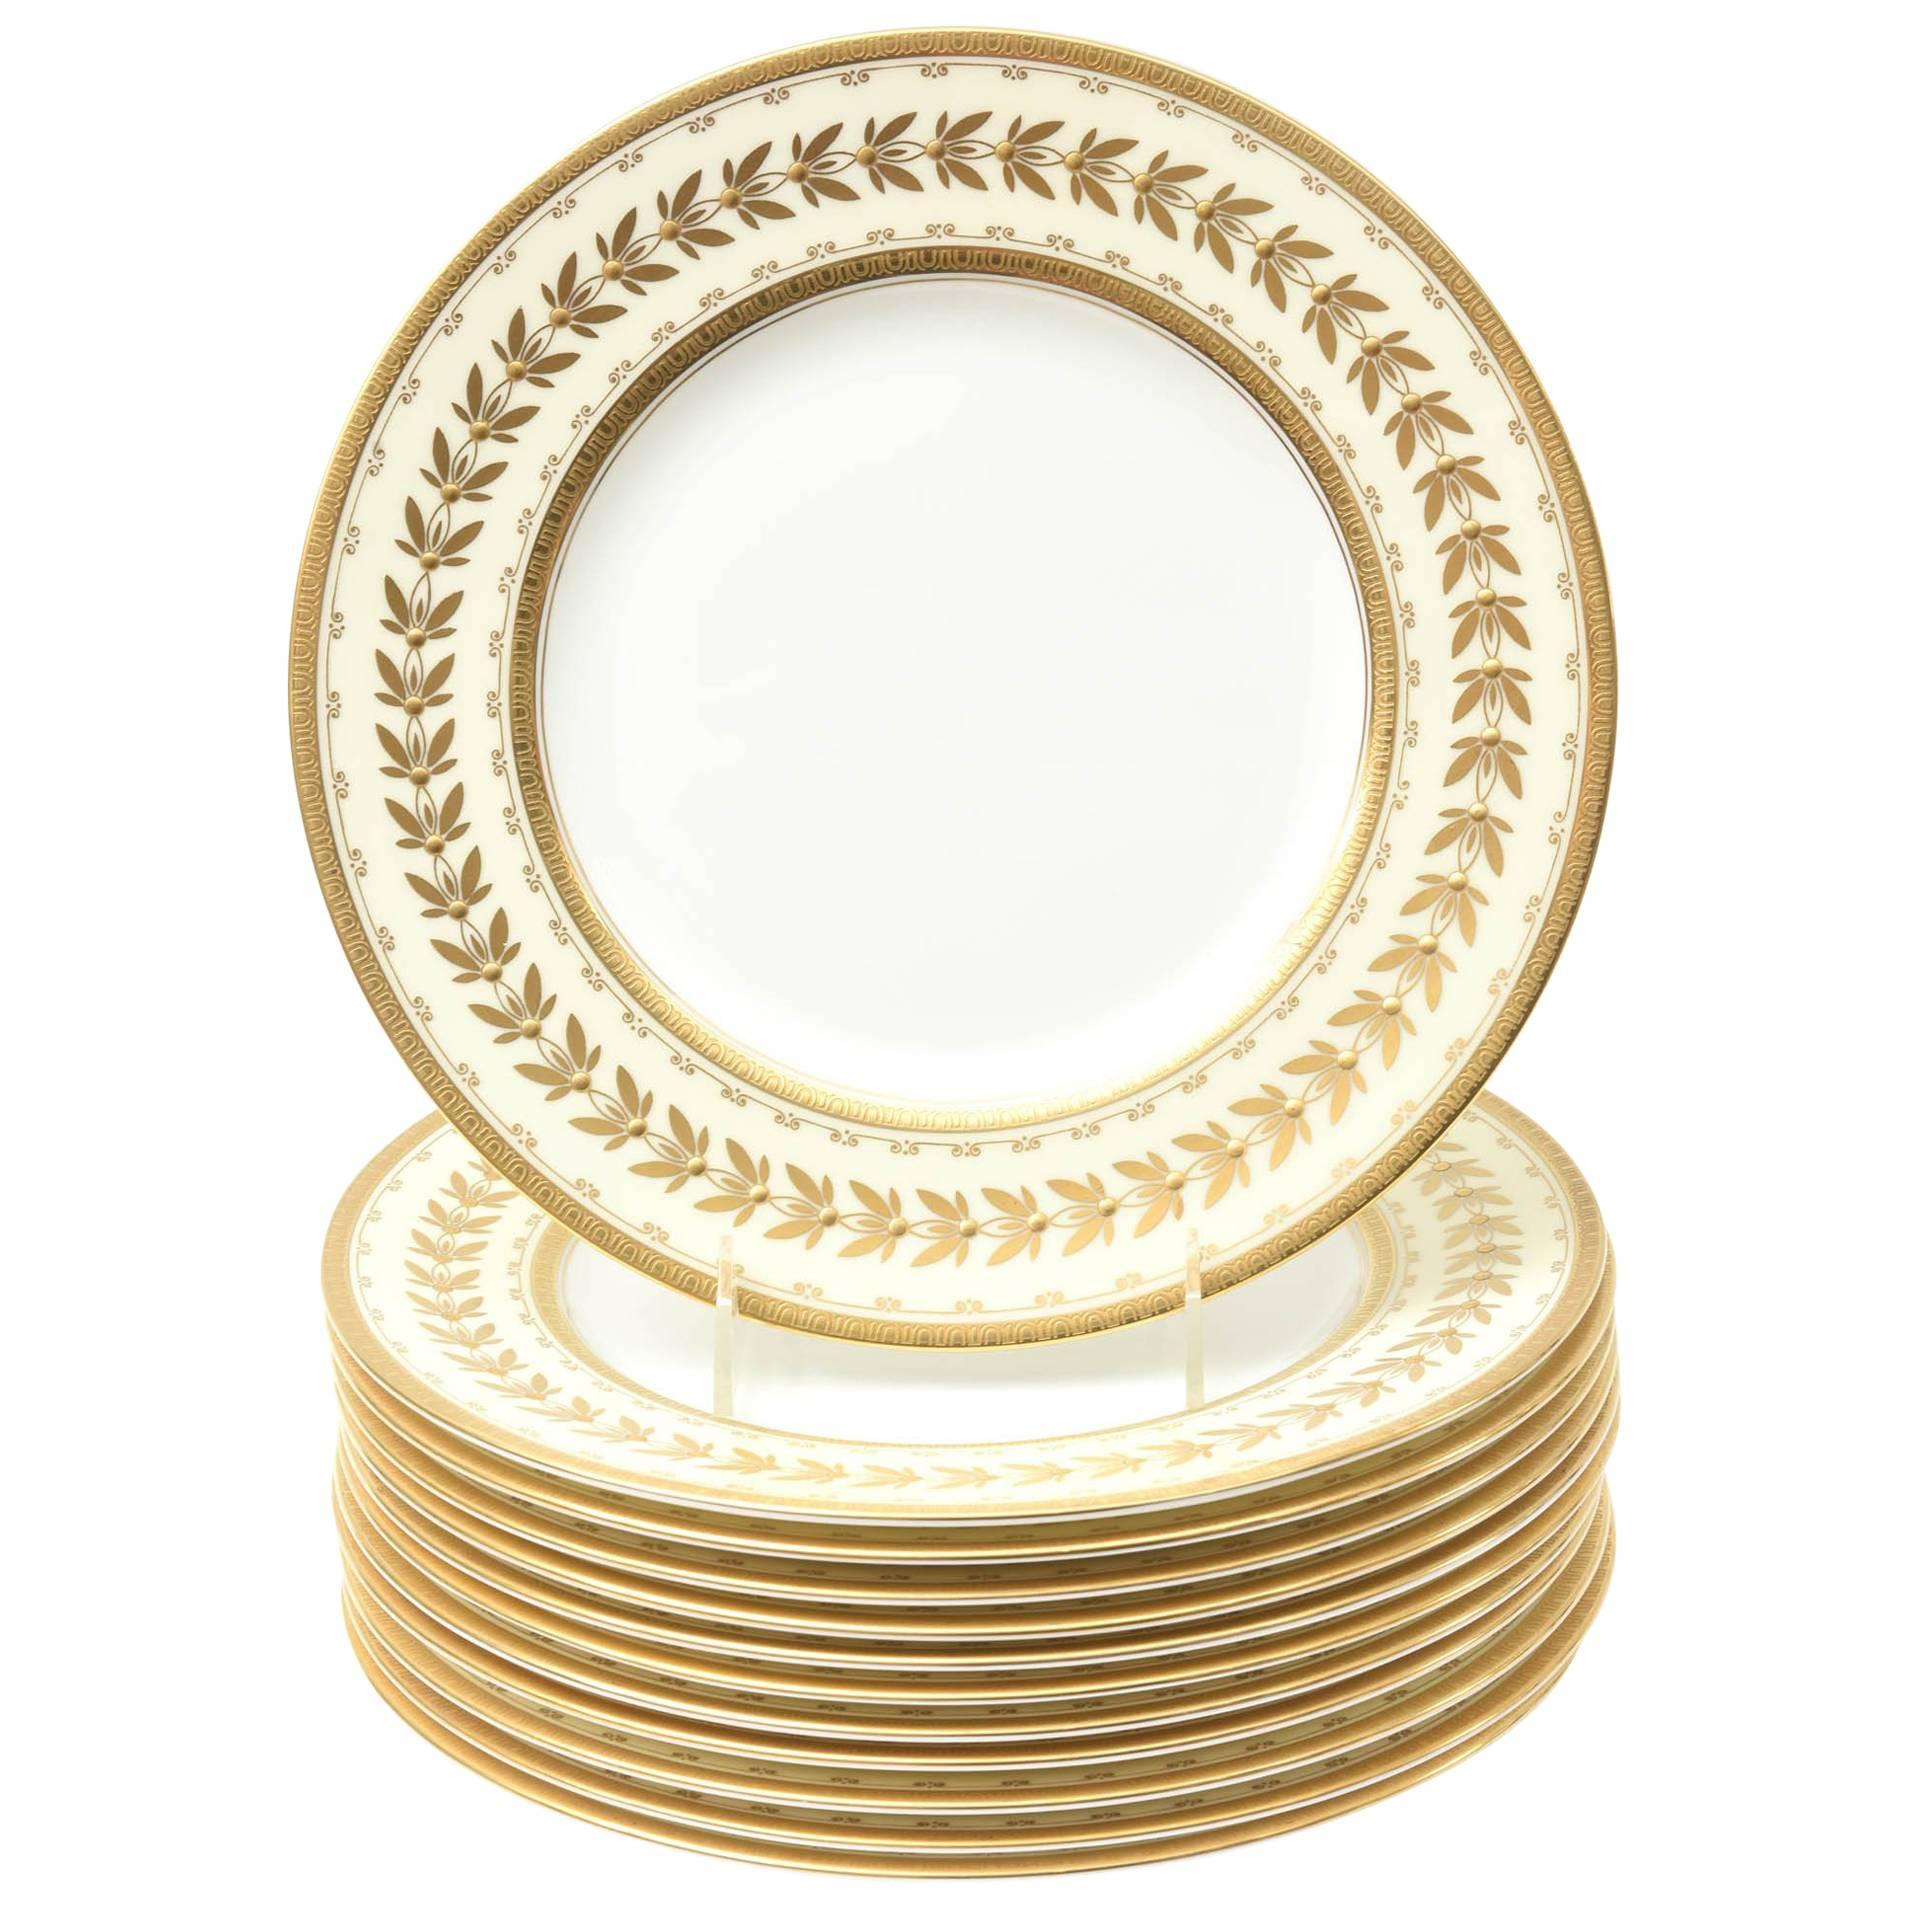 12 Dinner Plates, Custom for Tiffany, Antique with Raised Gold